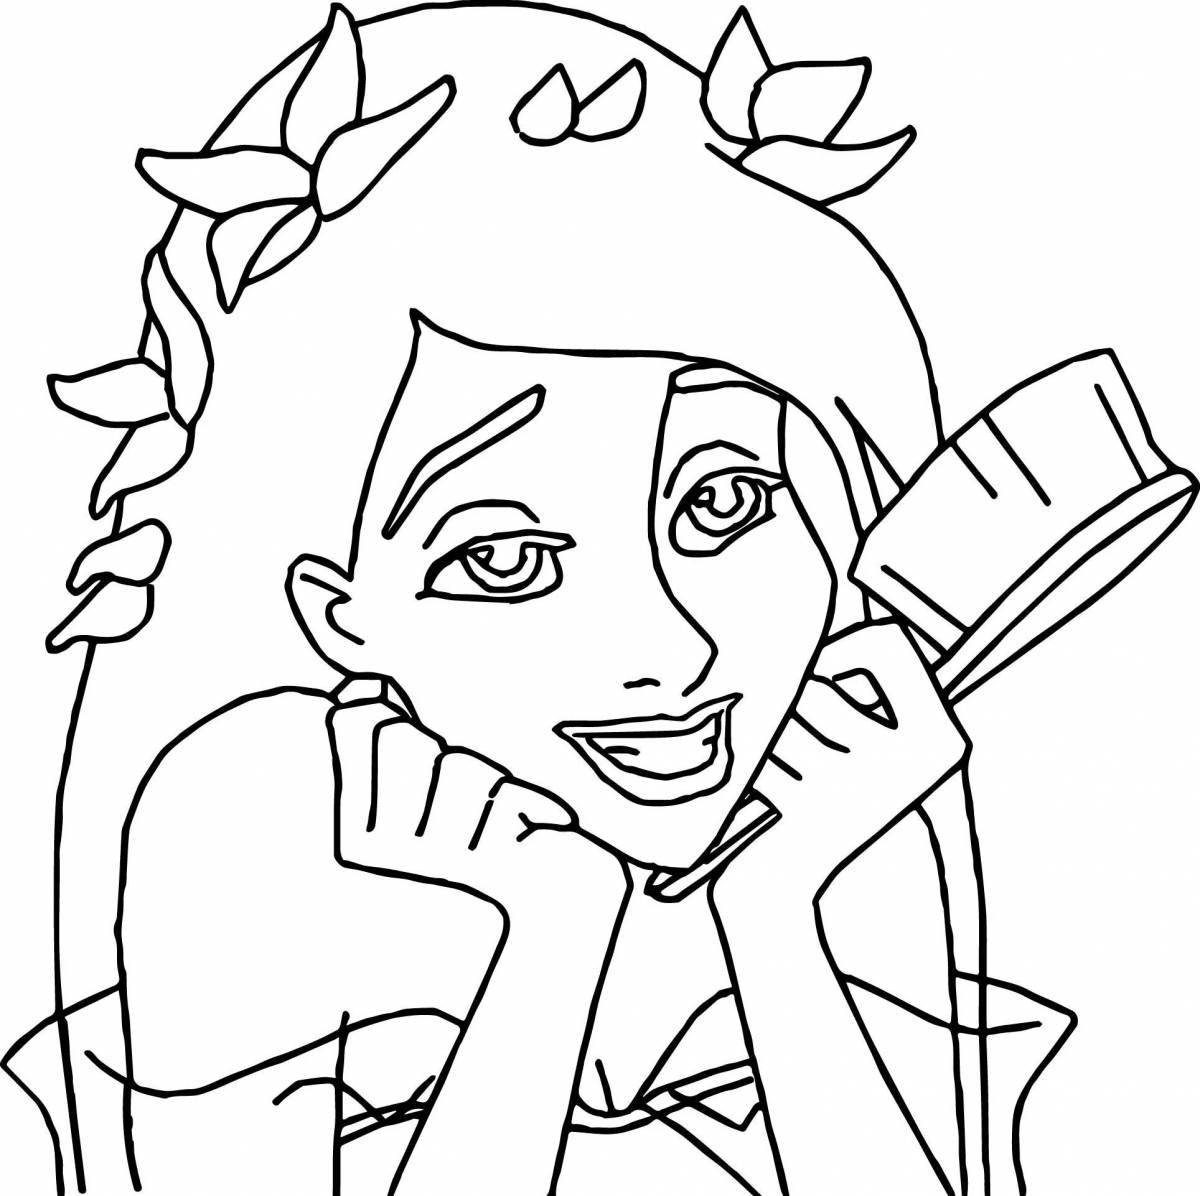 Funny giselle coloring book